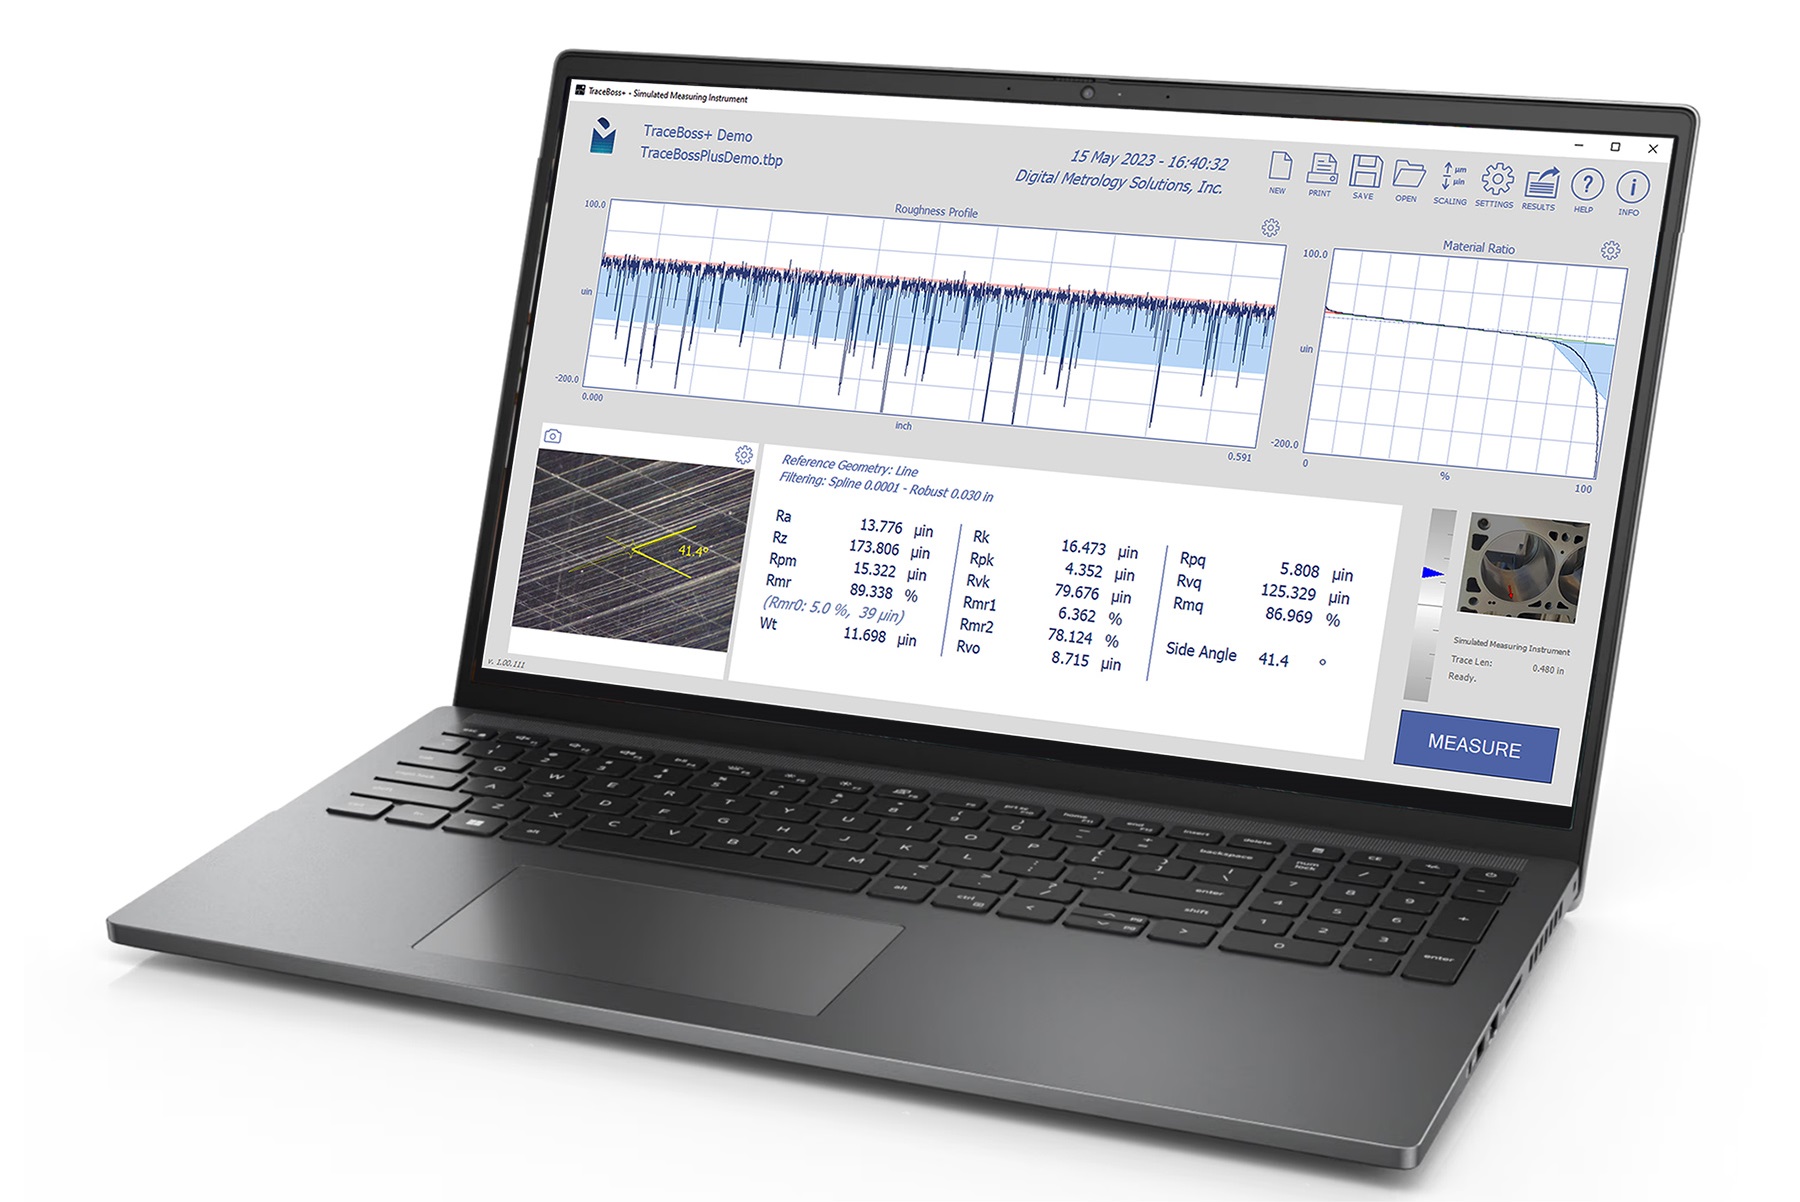 Digital Metrology’s TraceBoss+ software combines surface roughness and crosshatch measurement and analysis, as well as the ability to review surface quality and consistency.